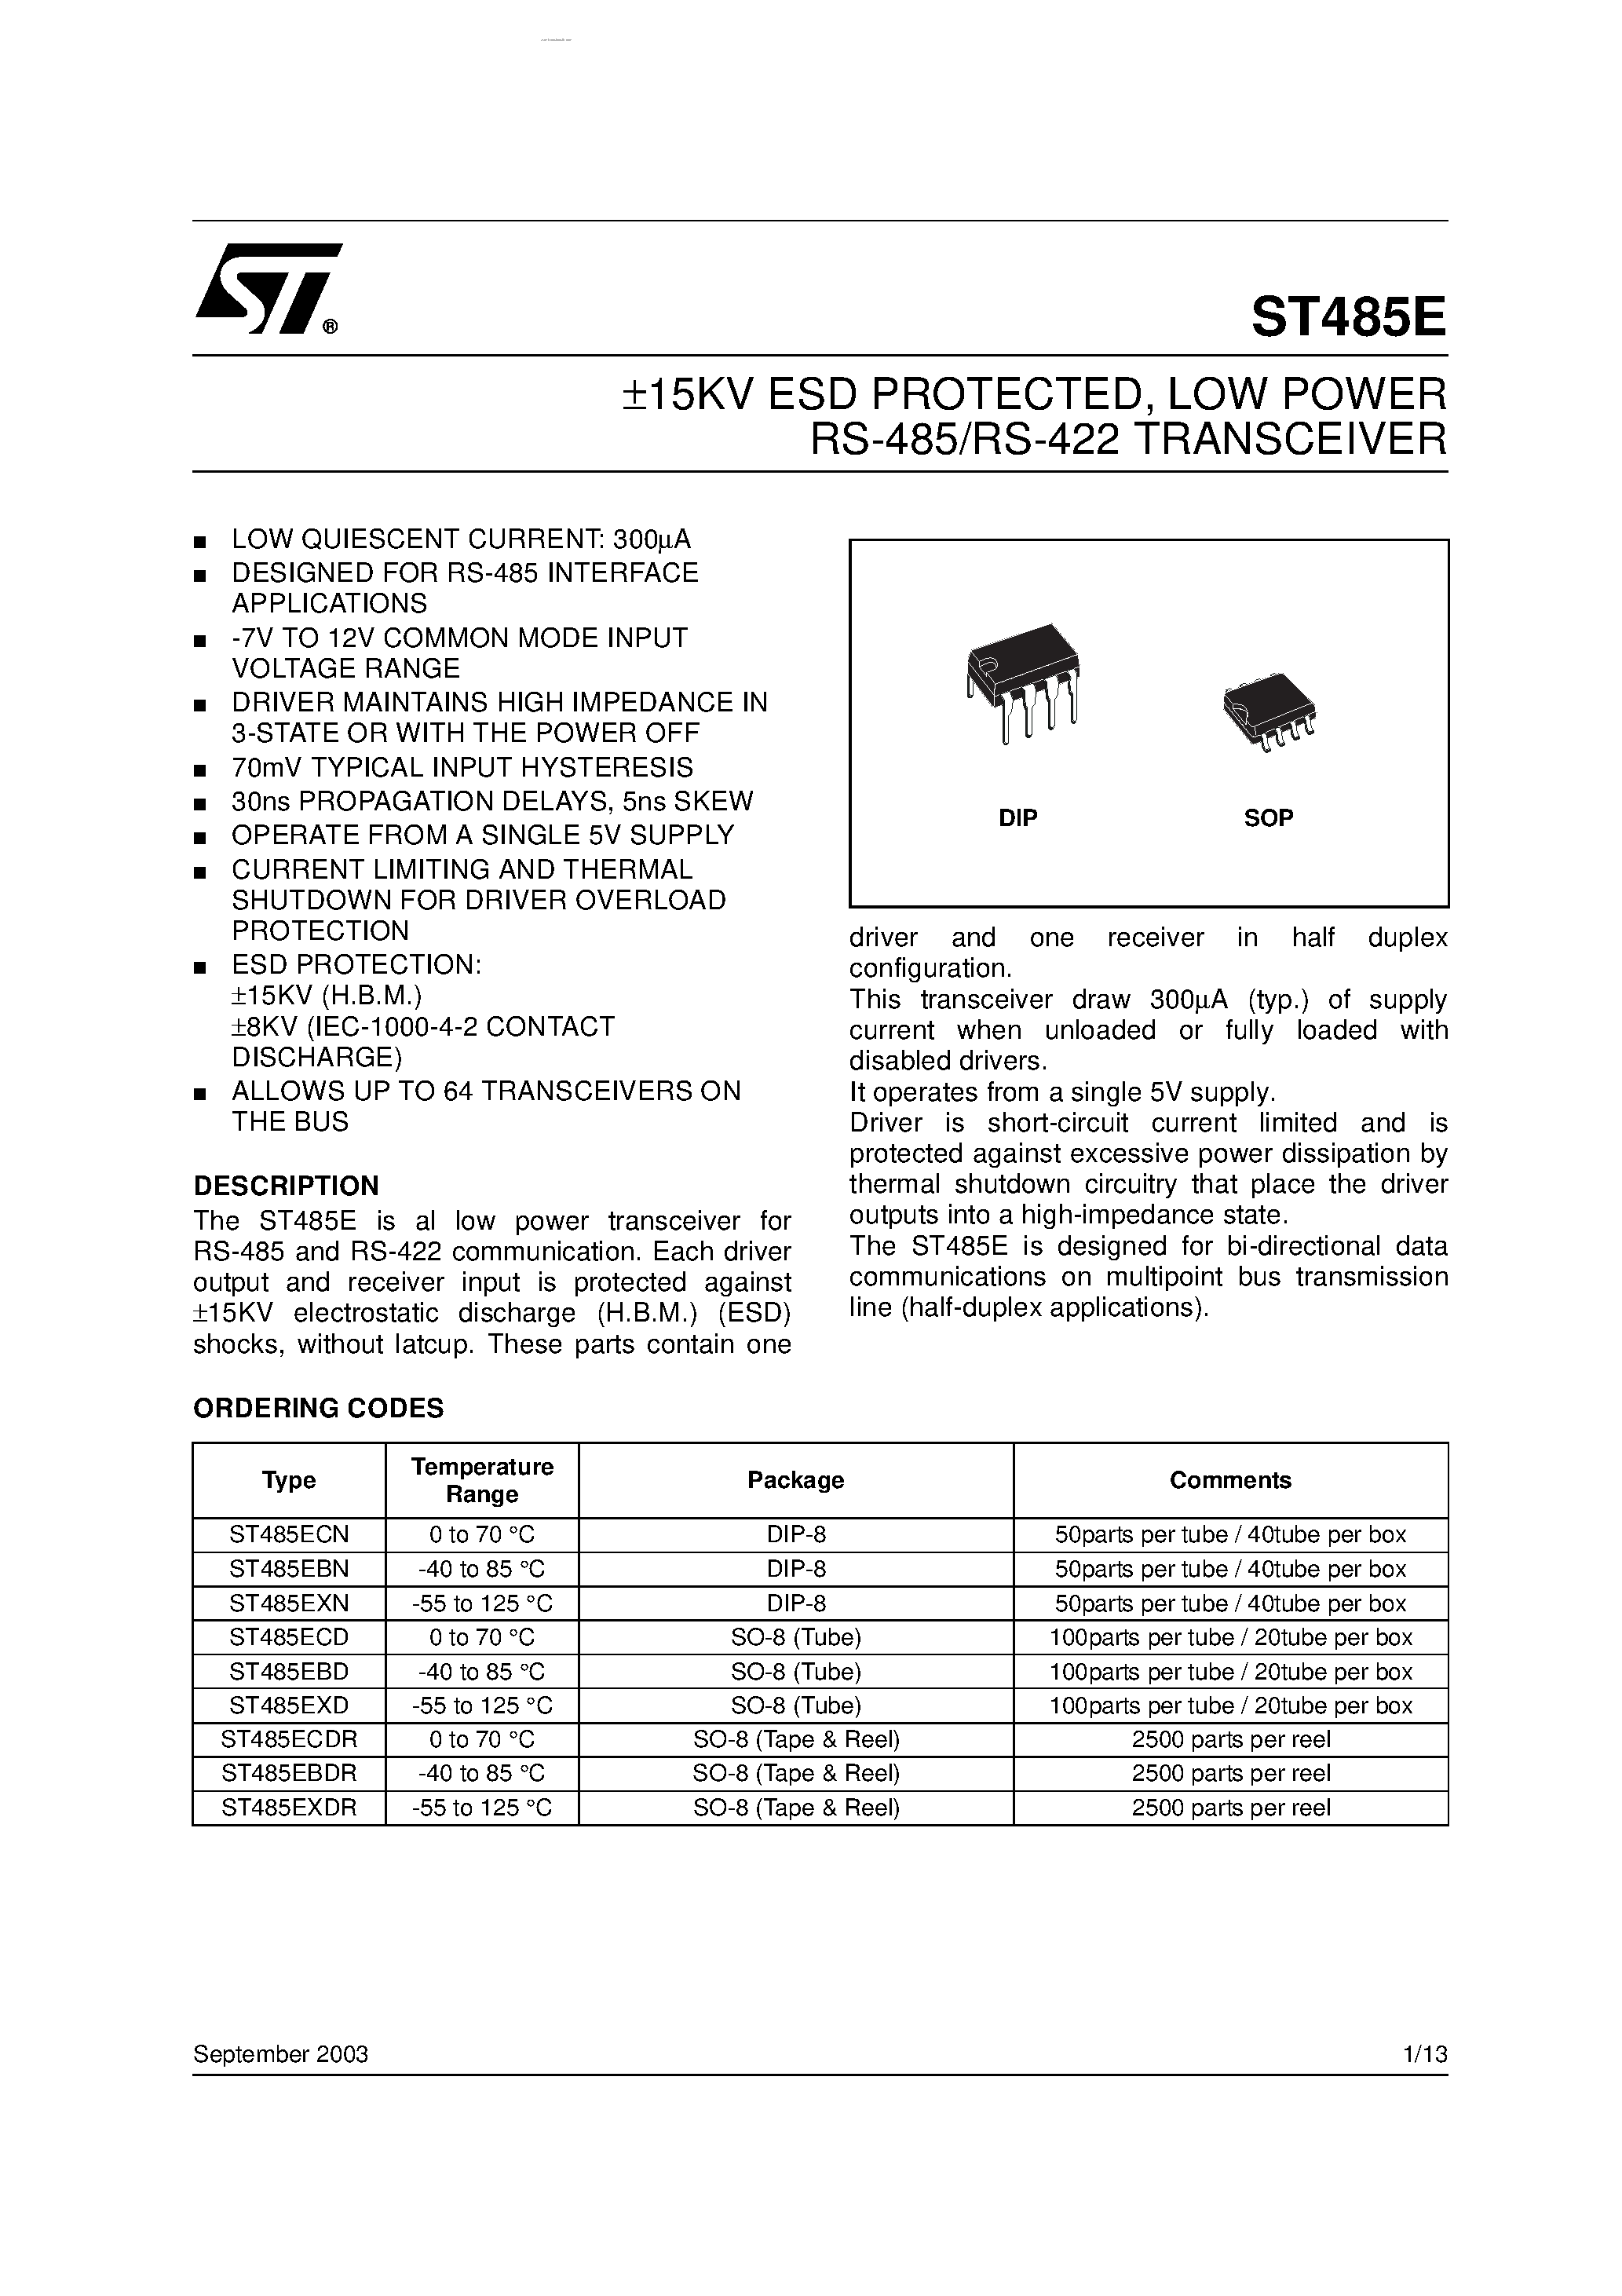 Datasheet ST485E - LOW POWER RS-485/RS-422 TRANSCEIVER page 1